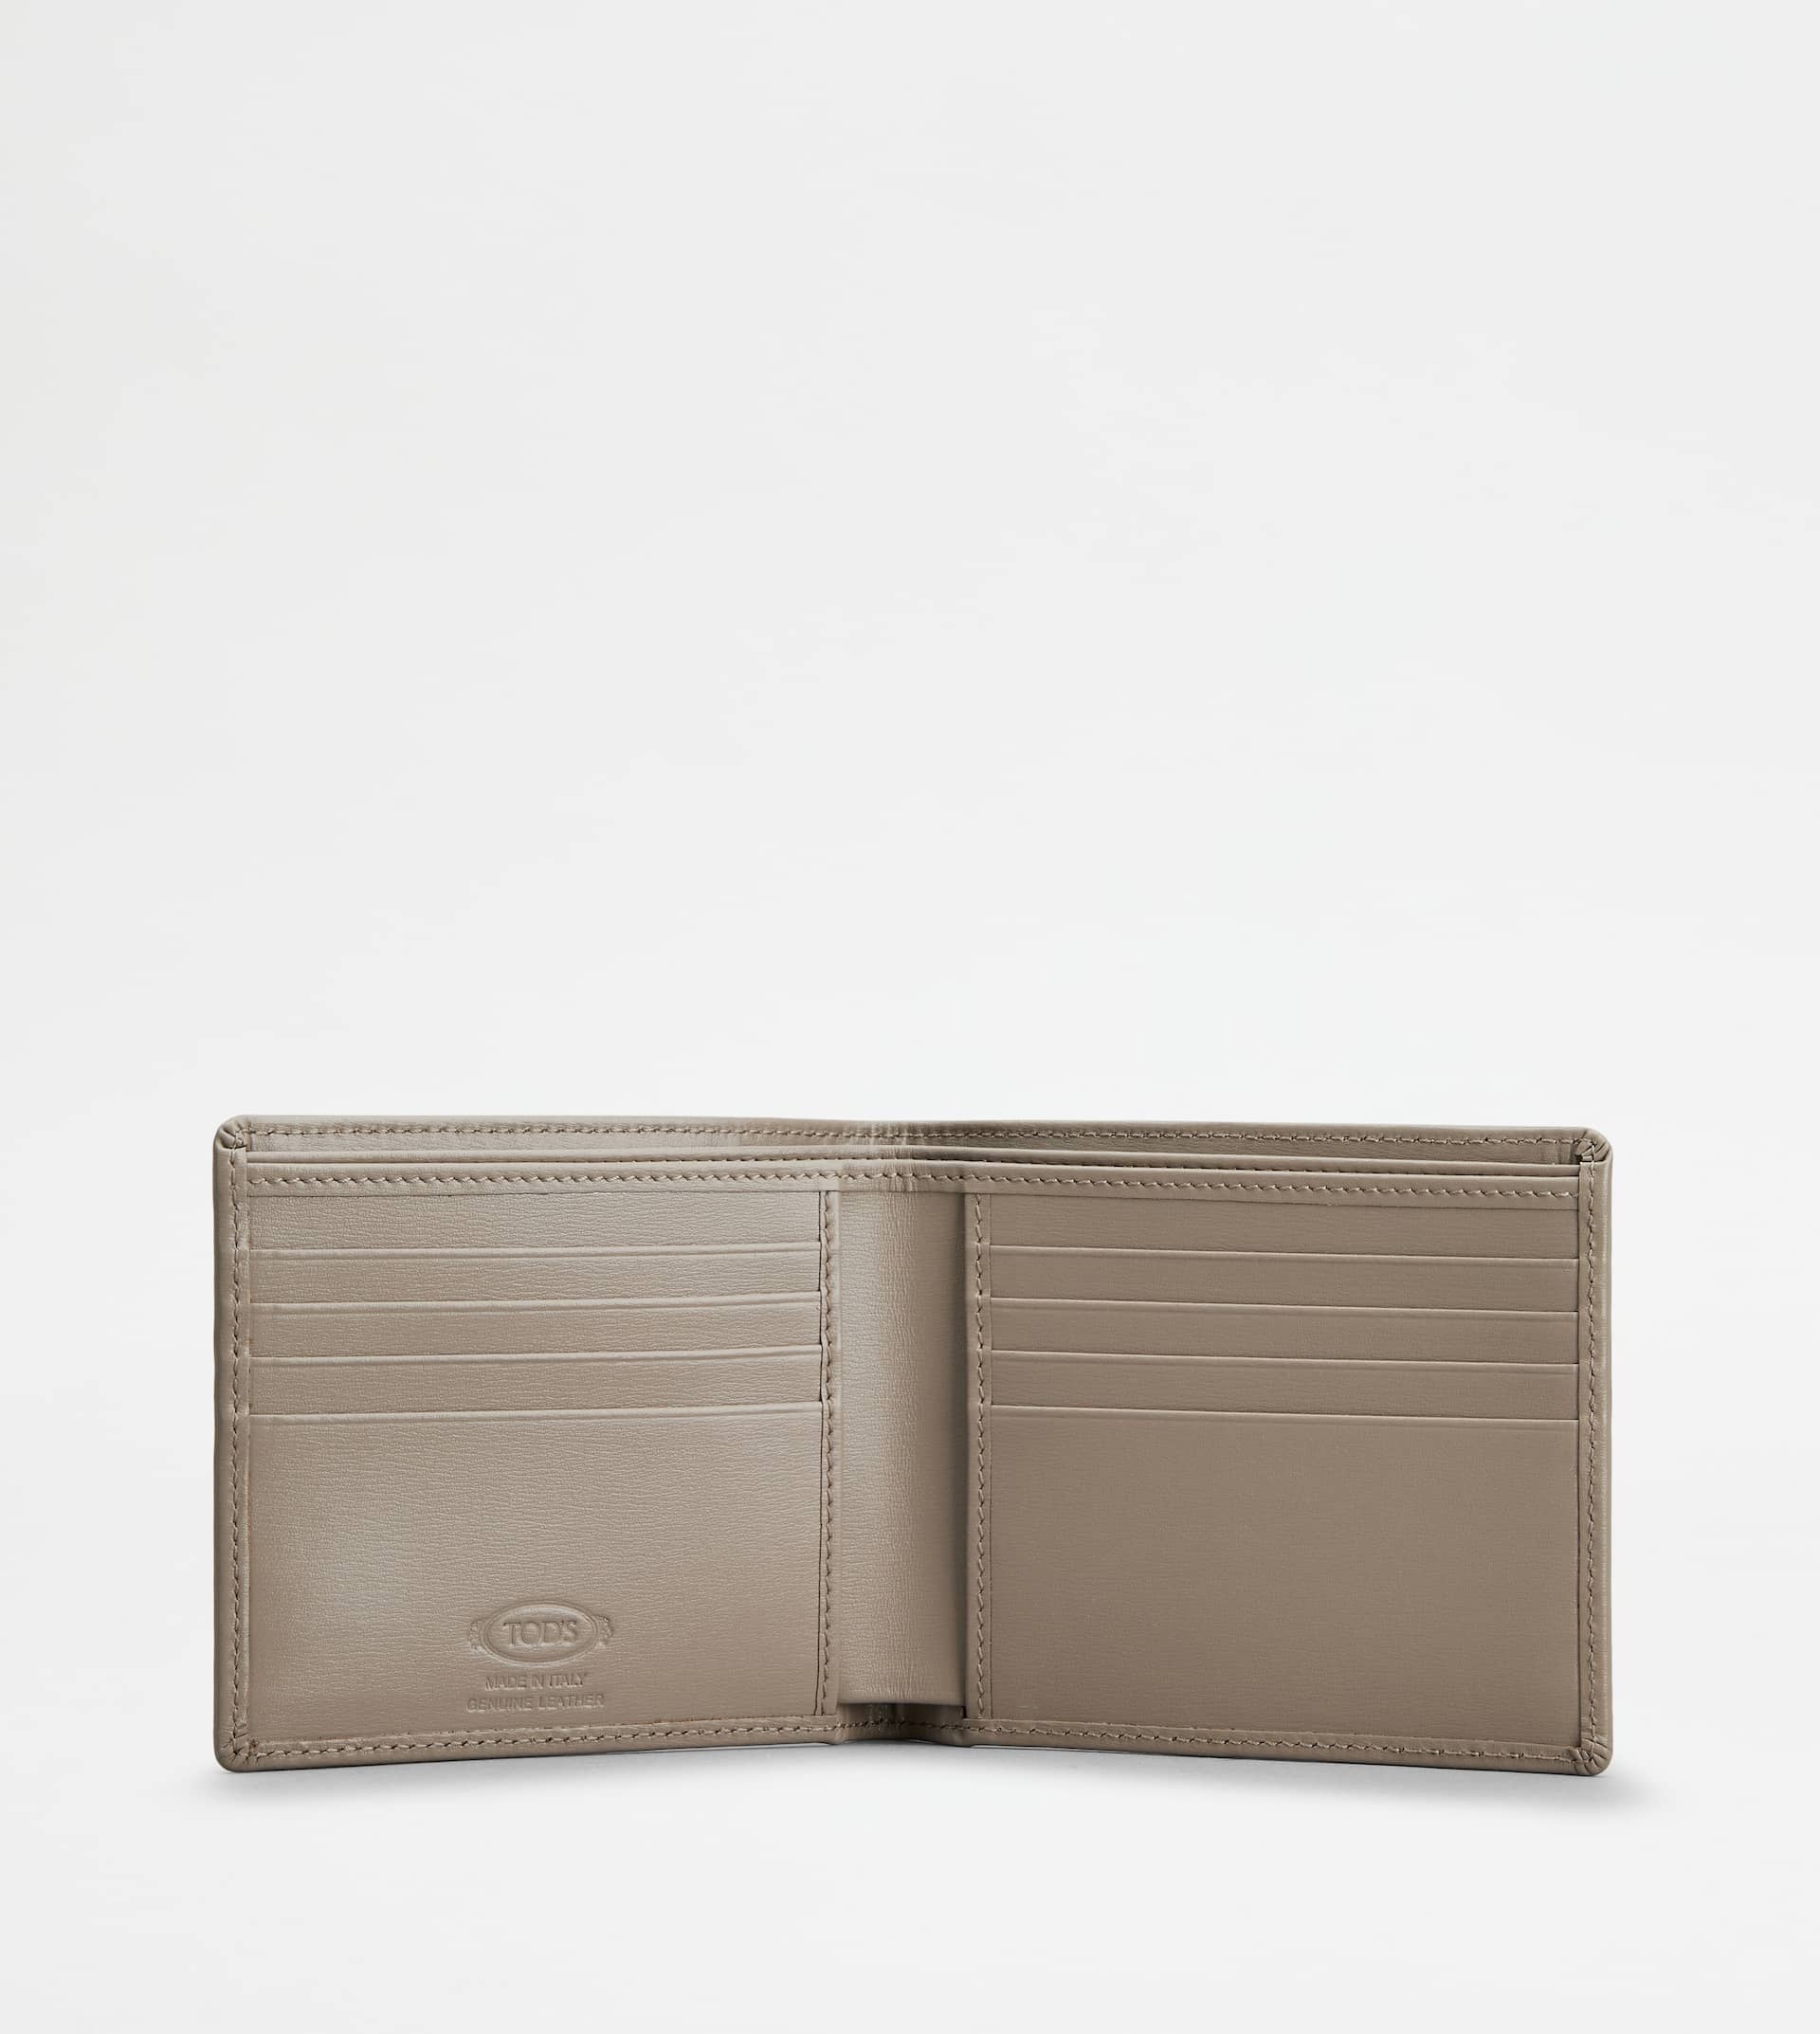 TOD'S WALLET IN LEATHER - GREY - 2